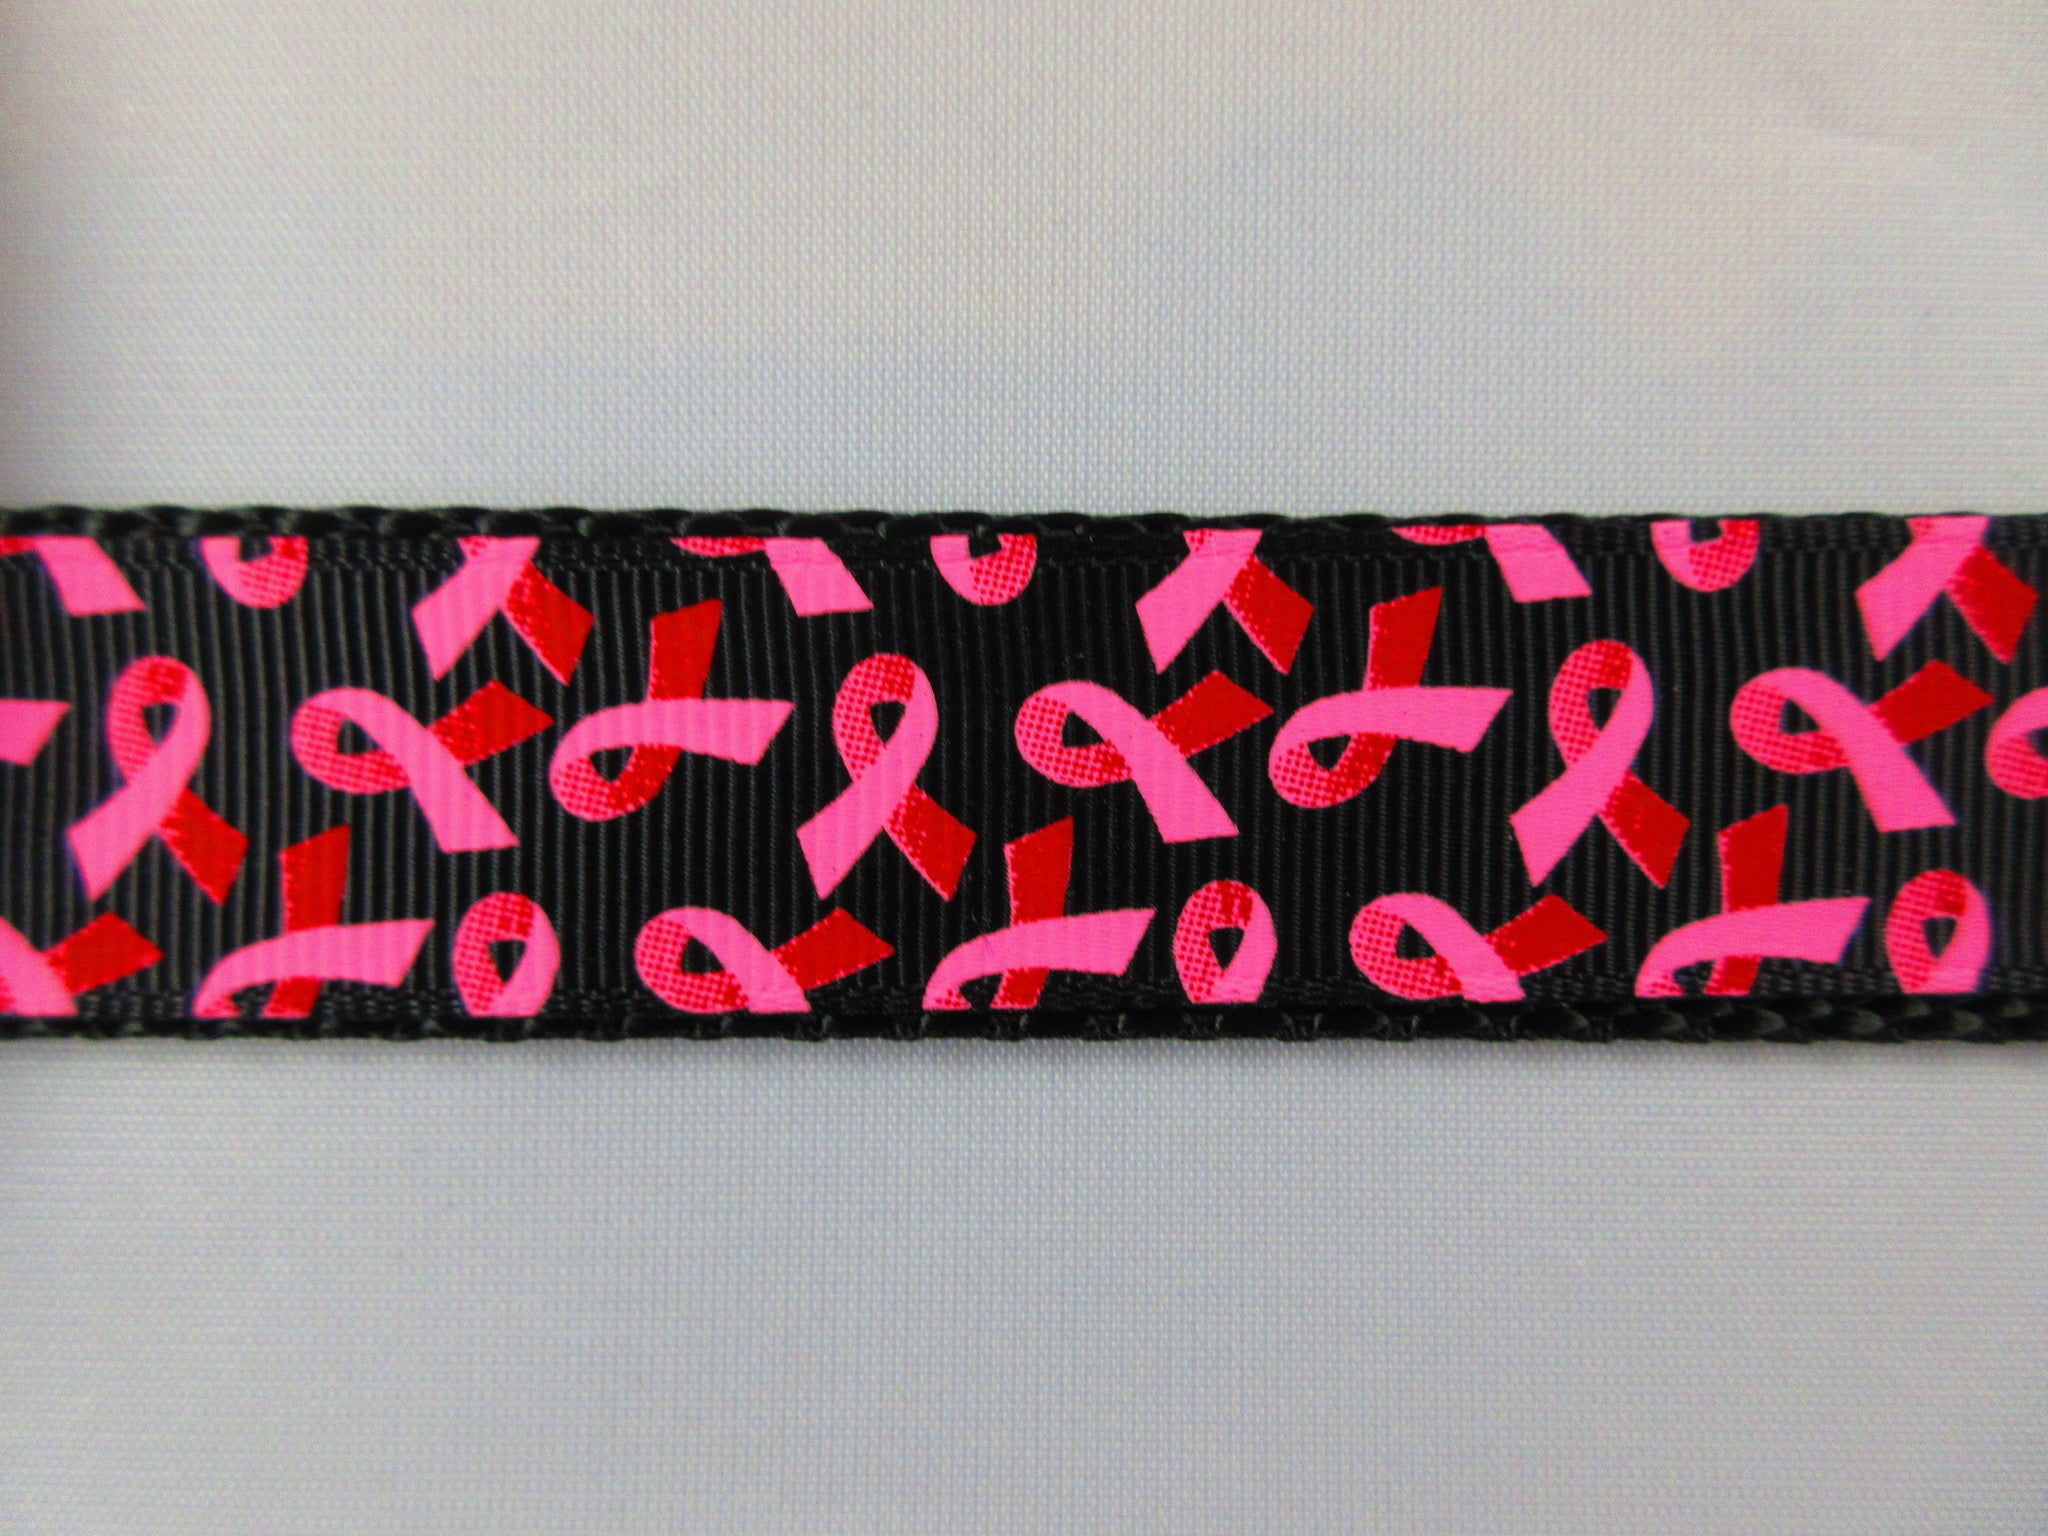 1" Breast Cancer Awareness Leash - Penny and Hoover's Pig Pen